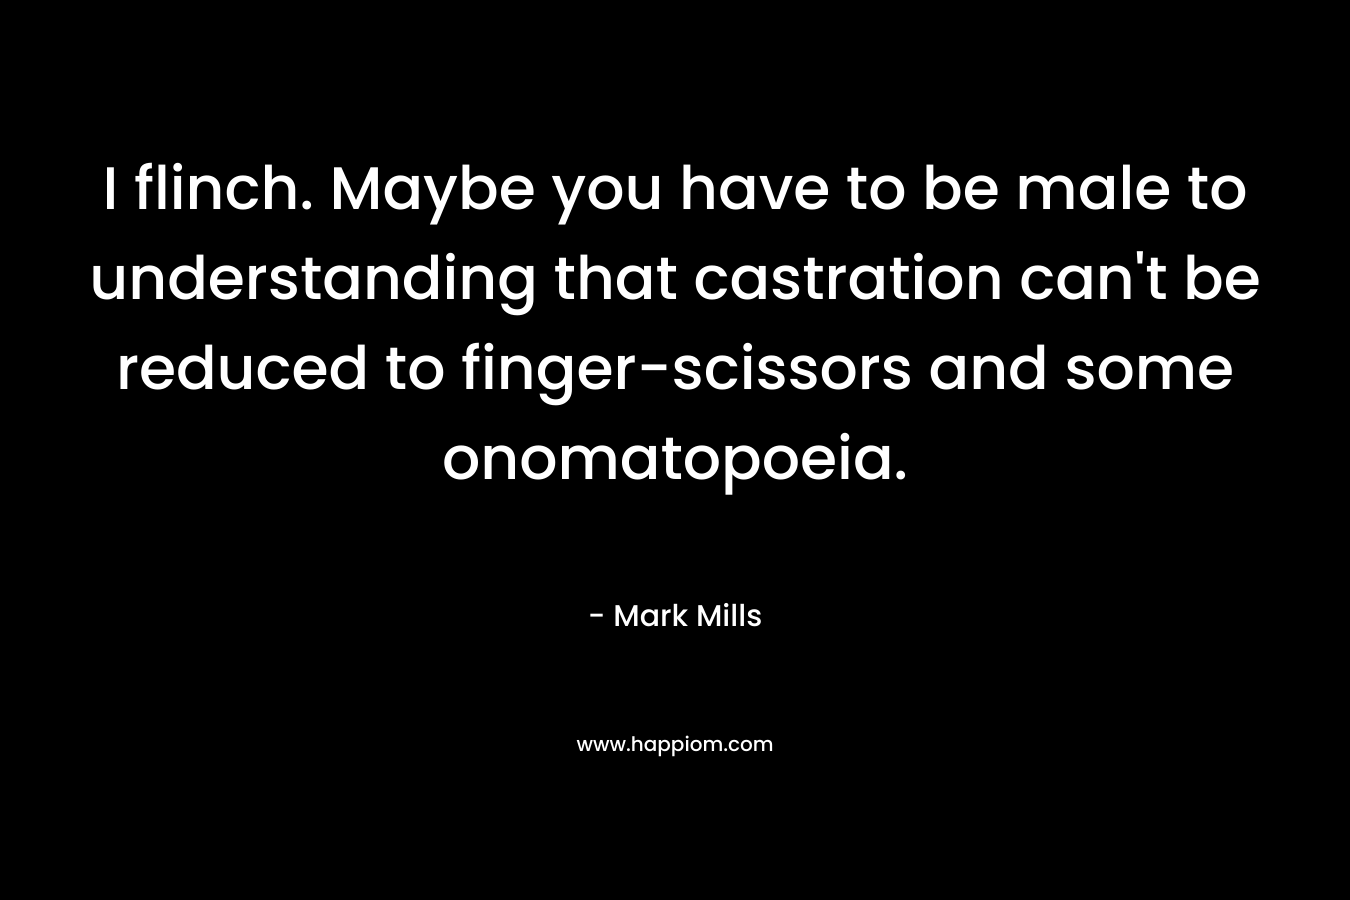 I flinch. Maybe you have to be male to understanding that castration can’t be reduced to finger-scissors and some onomatopoeia. – Mark Mills